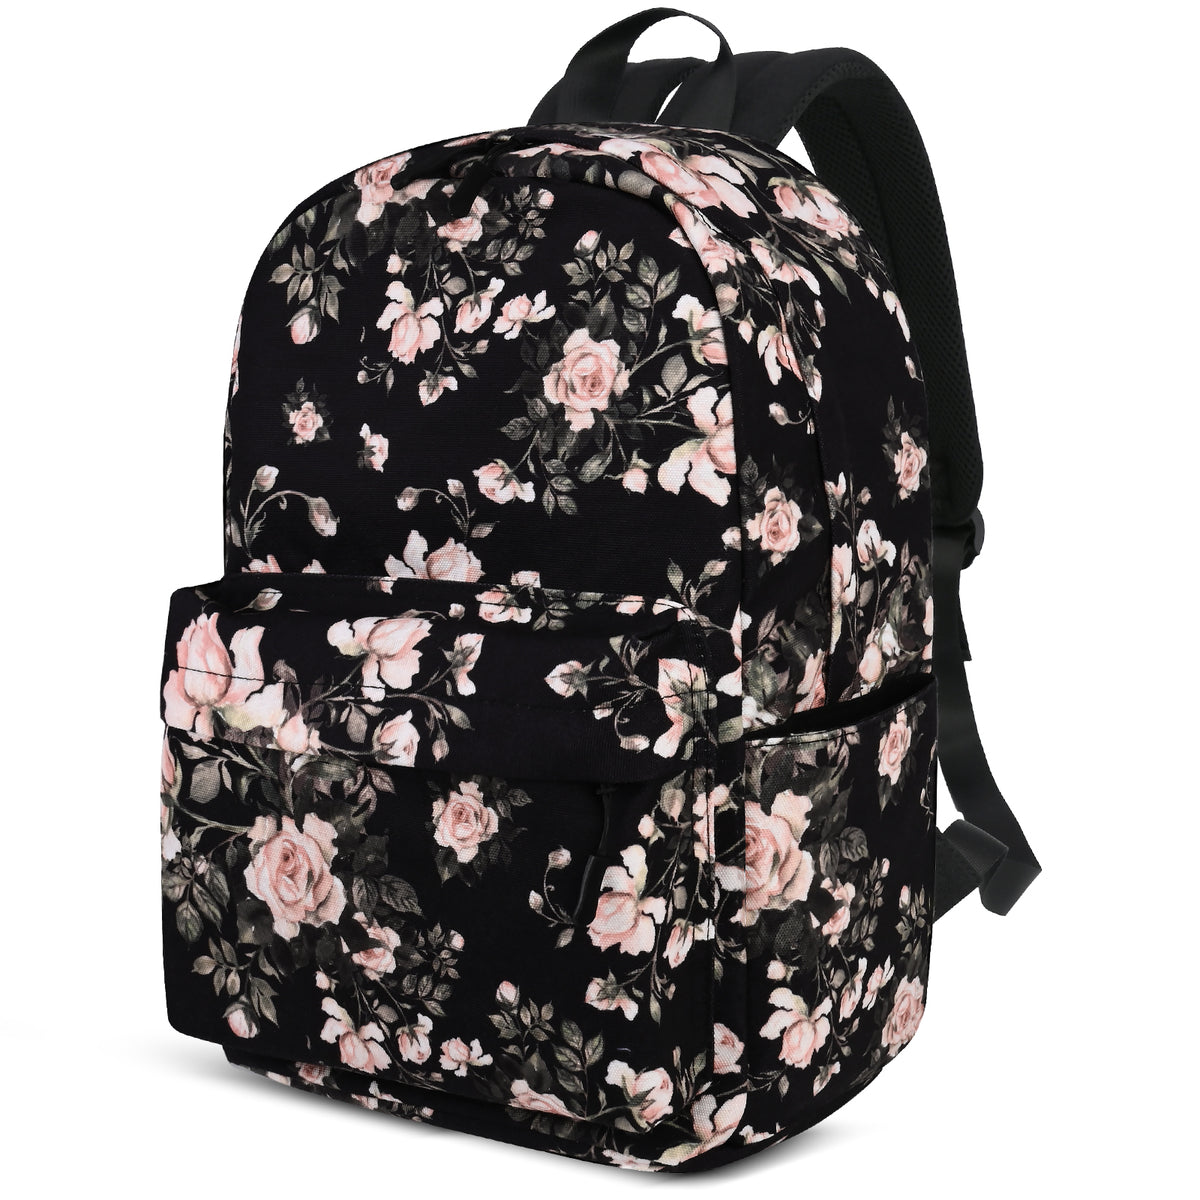 Canvas Backpack ,Washable Recycle Cotton 15.8 Inch Backpack for Women Fashion,Backpack for School (Black Flower)